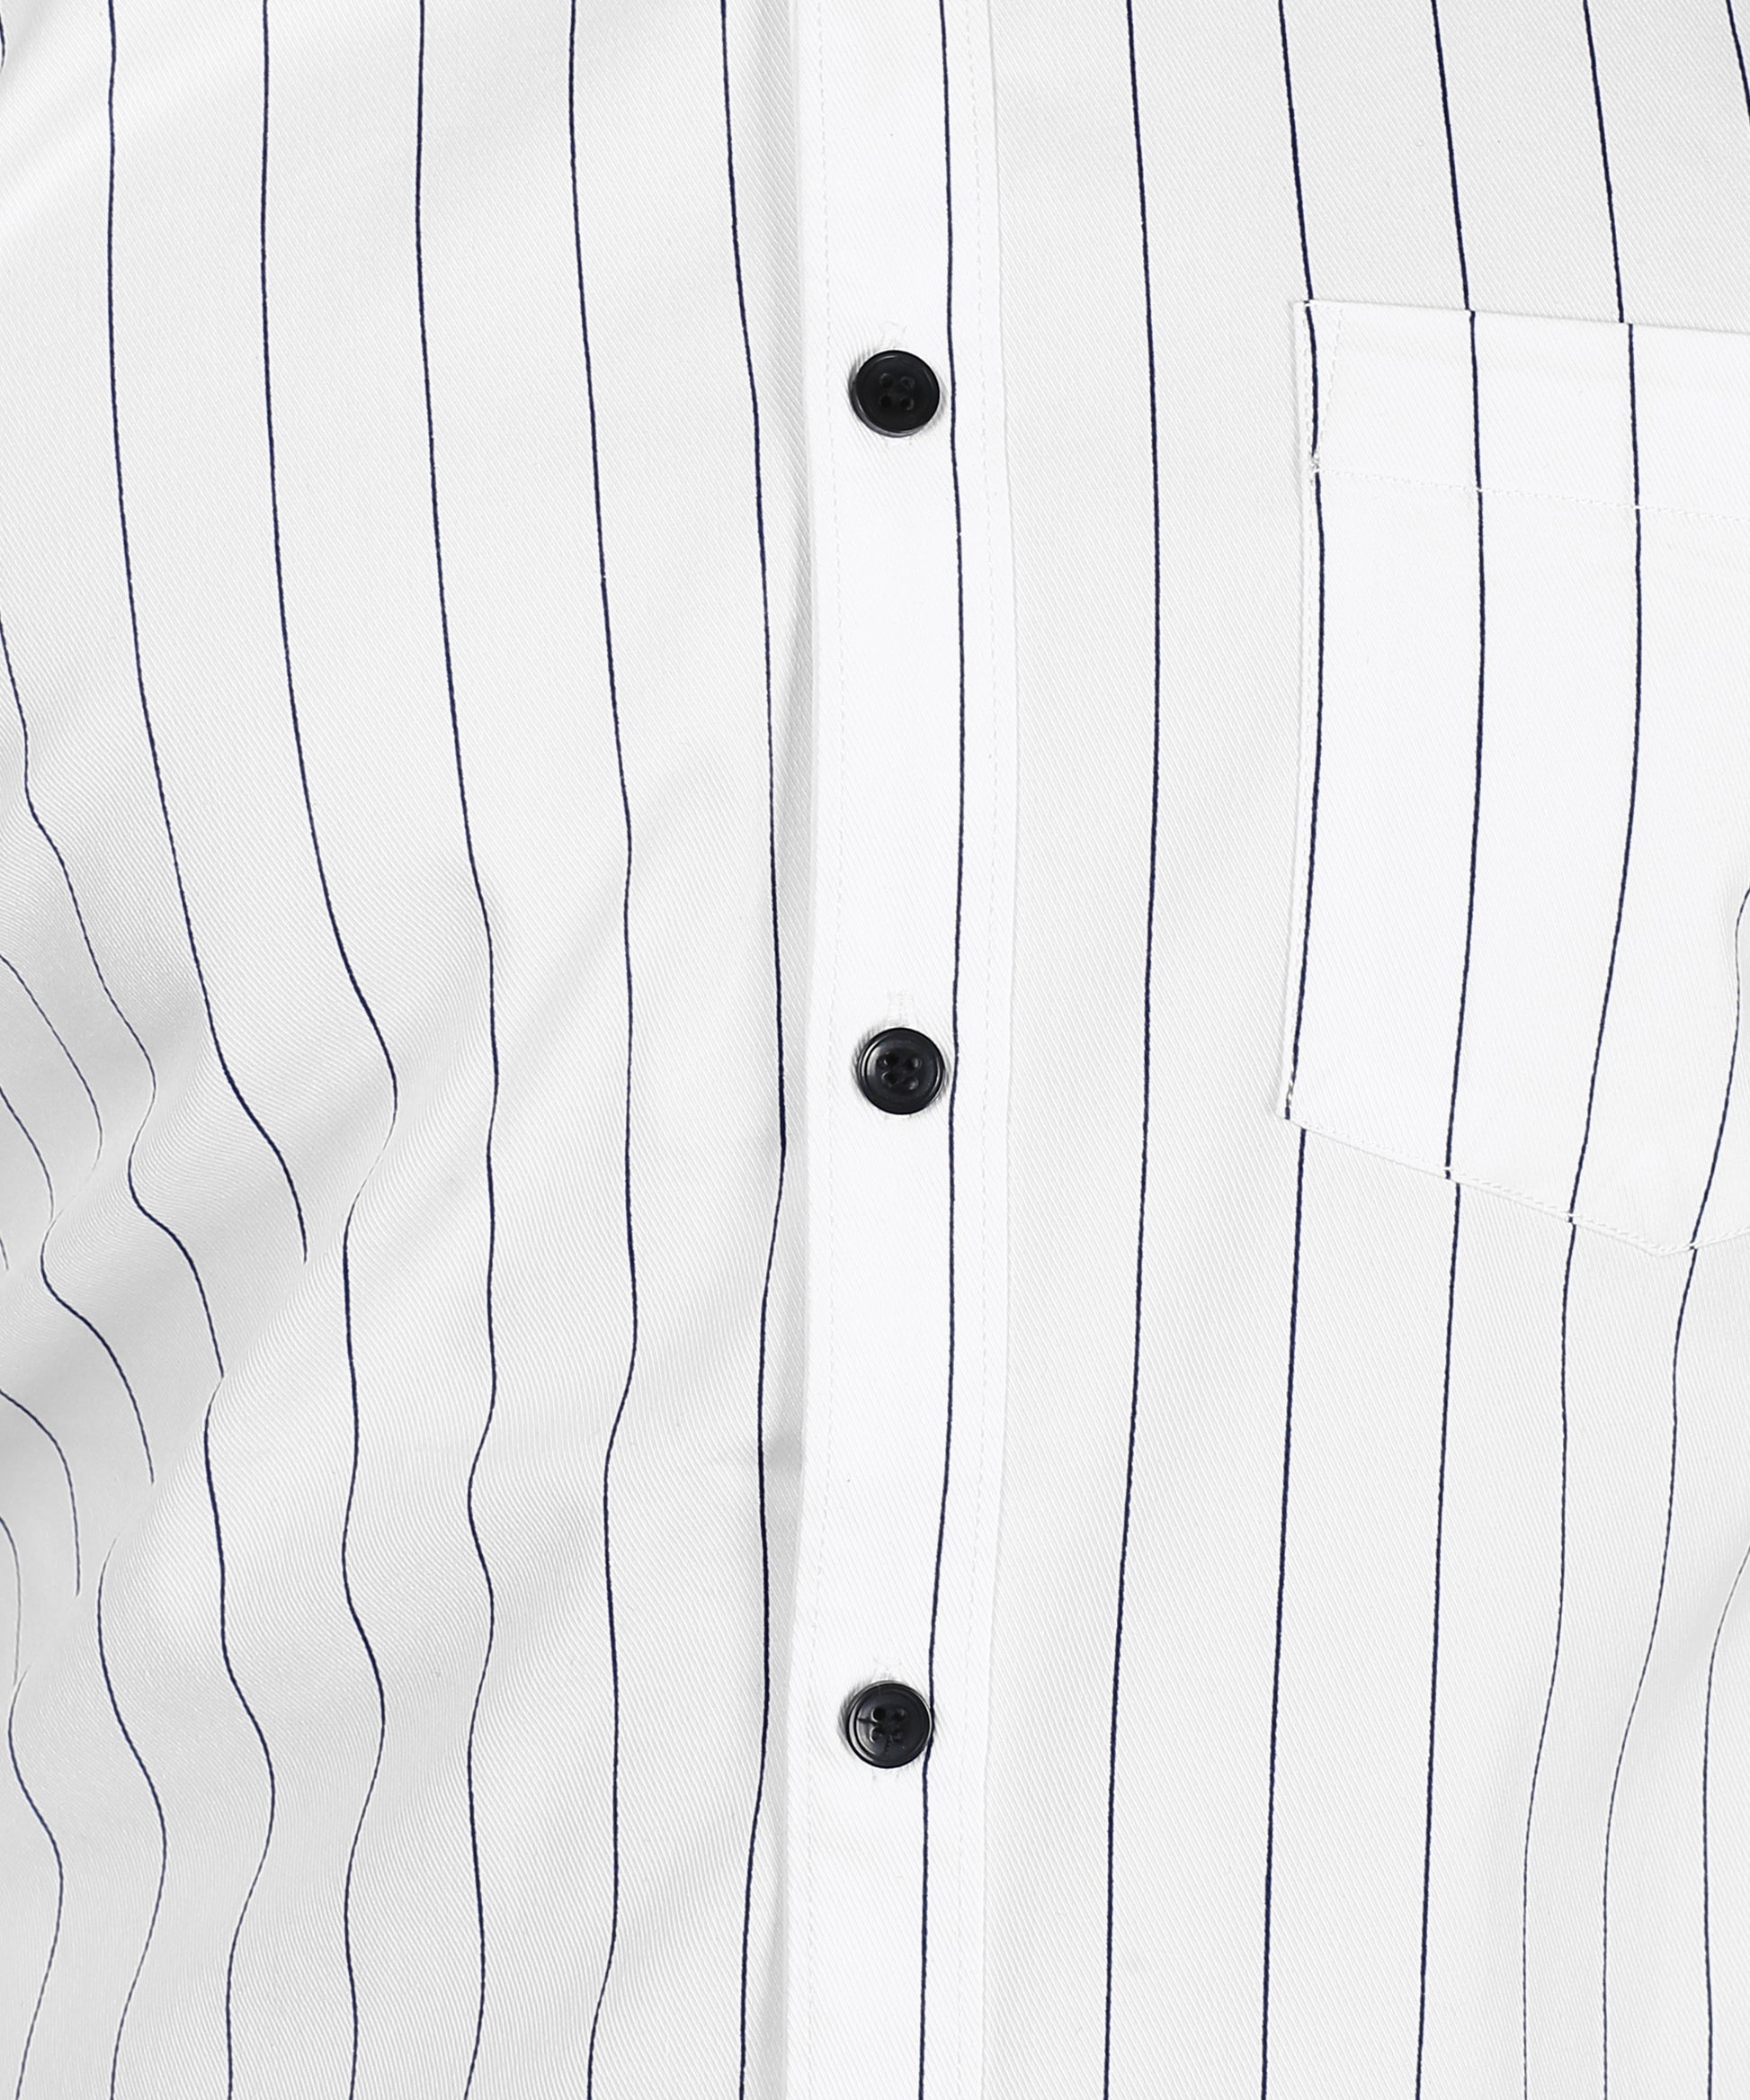 5thanfold Men's Pure Cotton Formal Full Sleeve Striped White Slim Fit Shirt